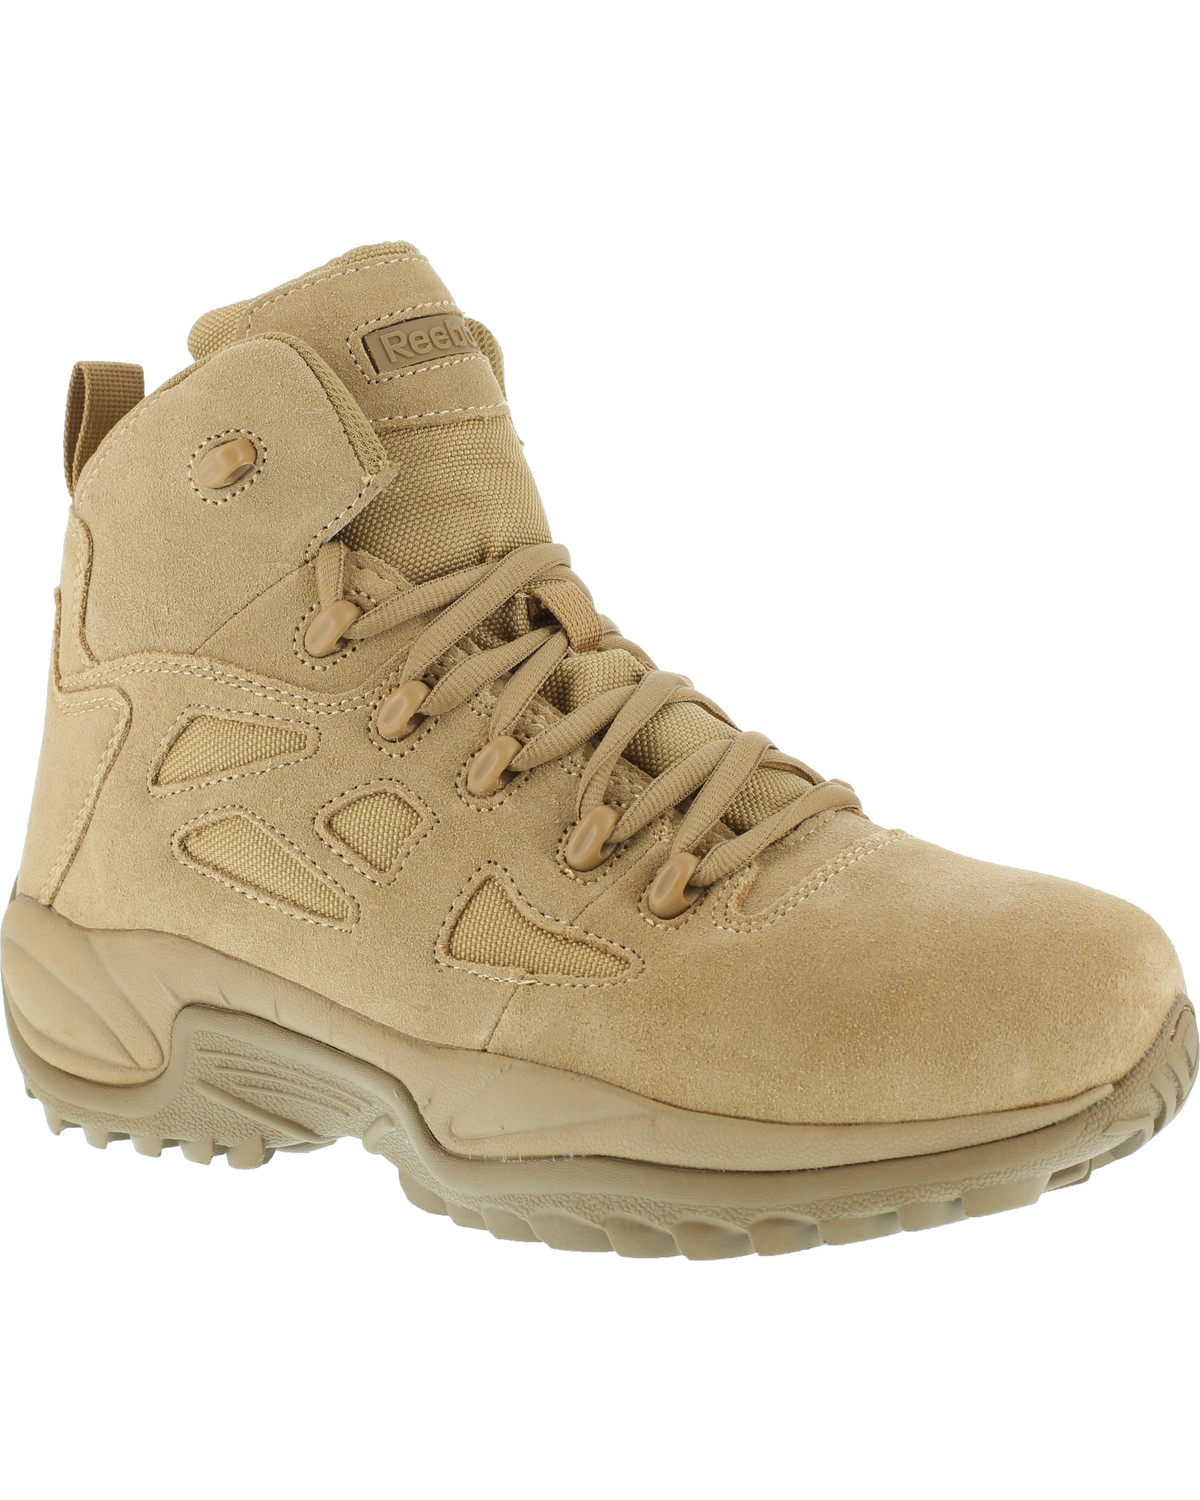 Reebok Men's Stealth 6" Lace-Up Side Zip Work Boots - Soft Toe